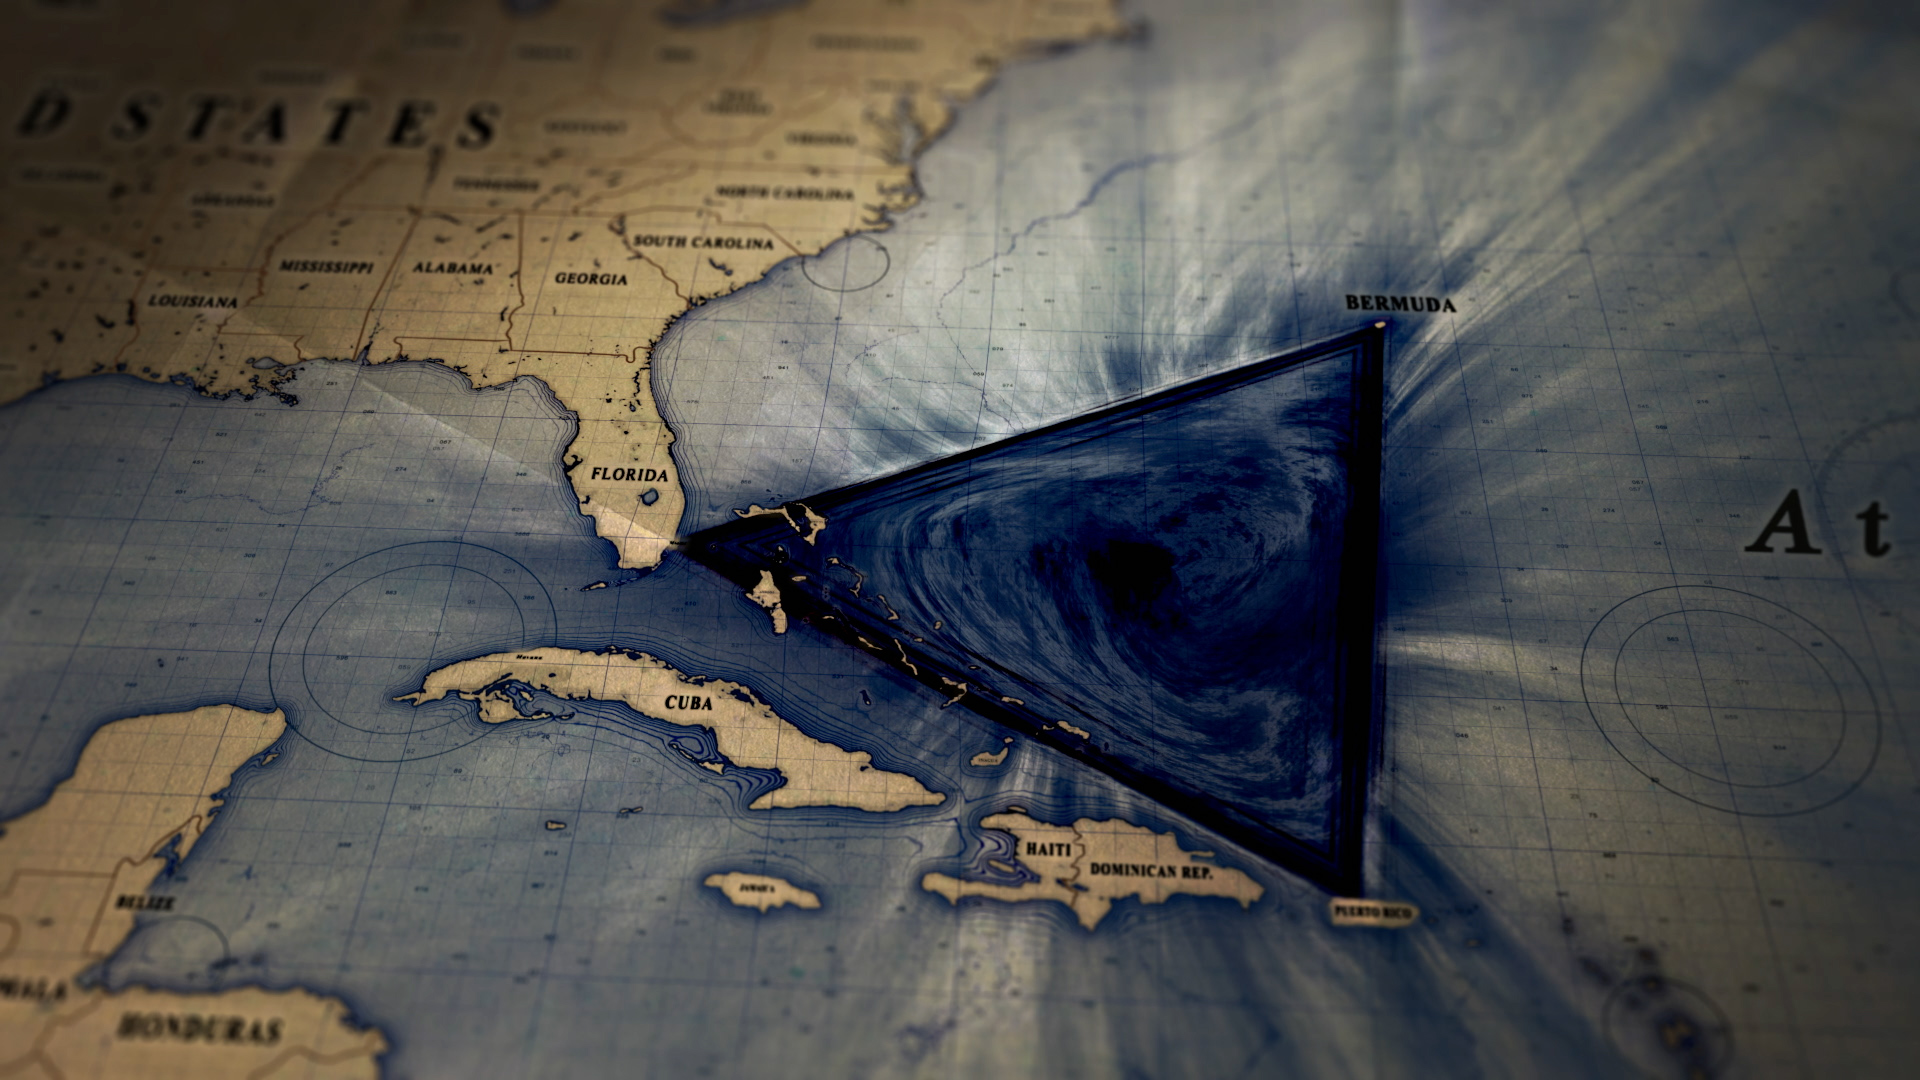 Watch The Bermuda Triangle: Into Cursed Waters Season 1 Episode 1 | HISTORY Channel